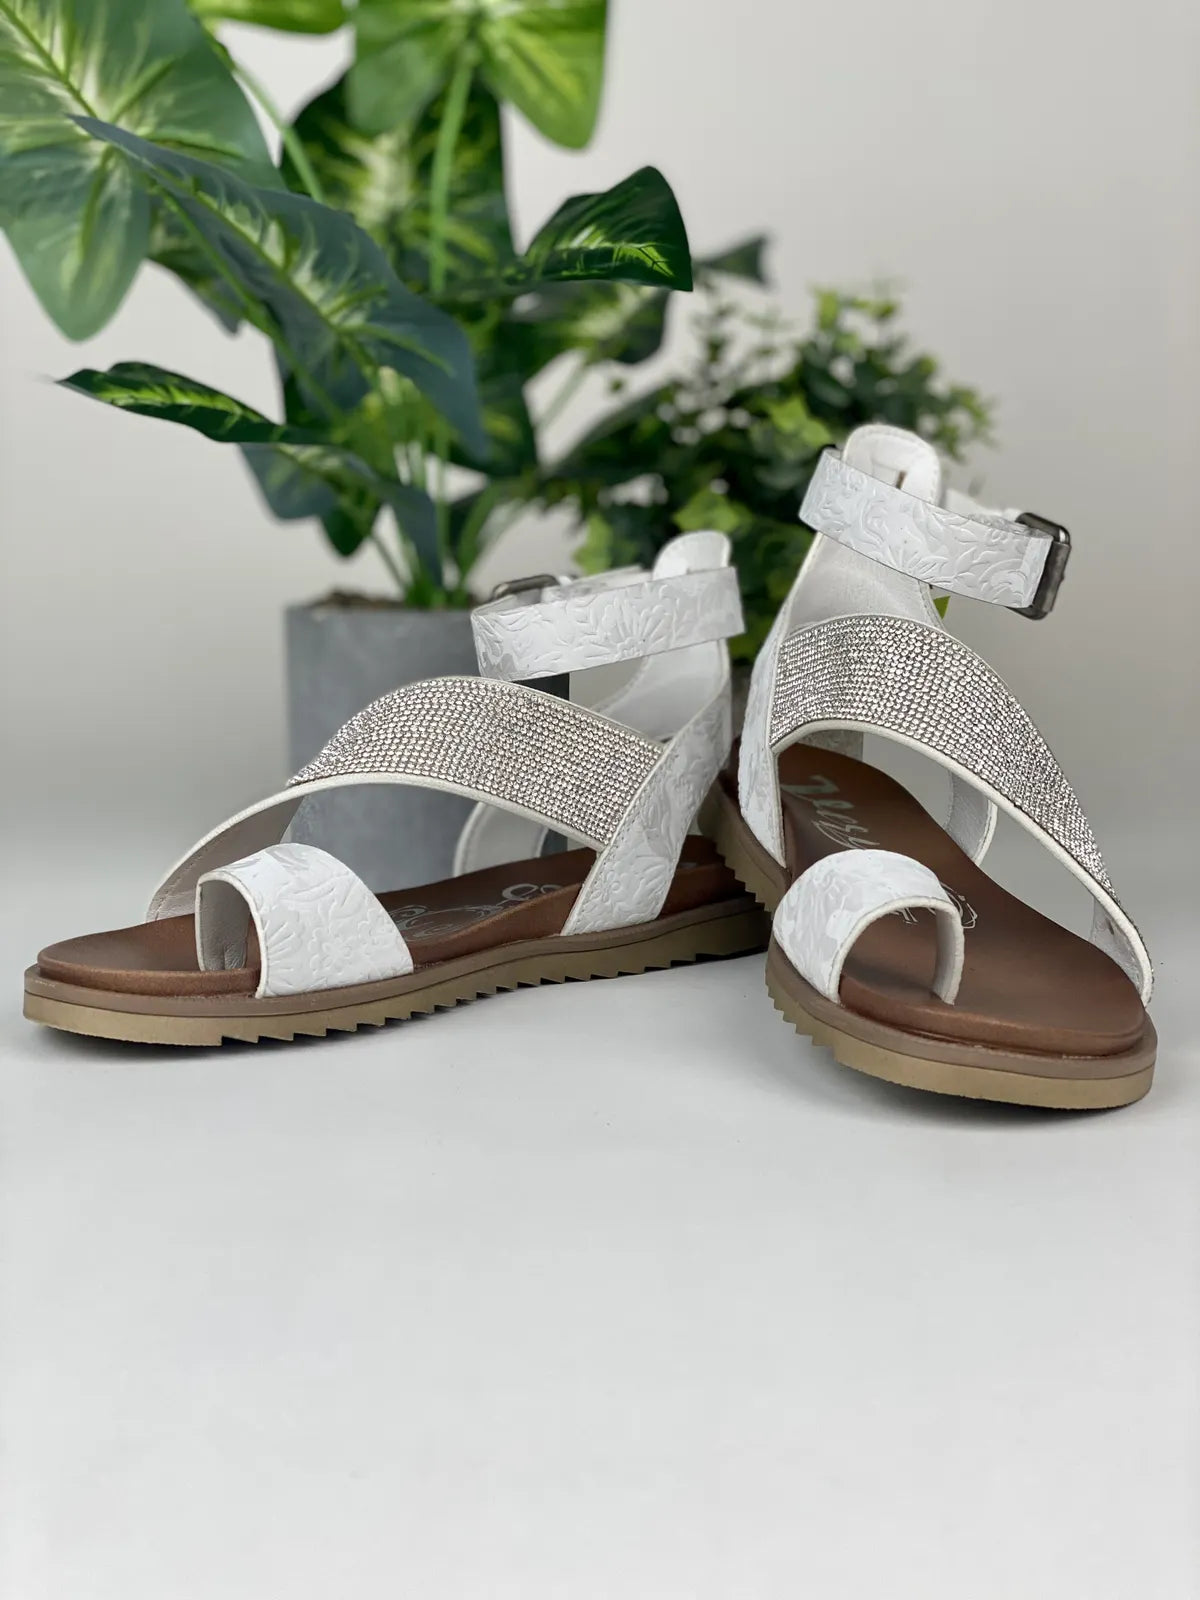 The Collette Sandal Very G